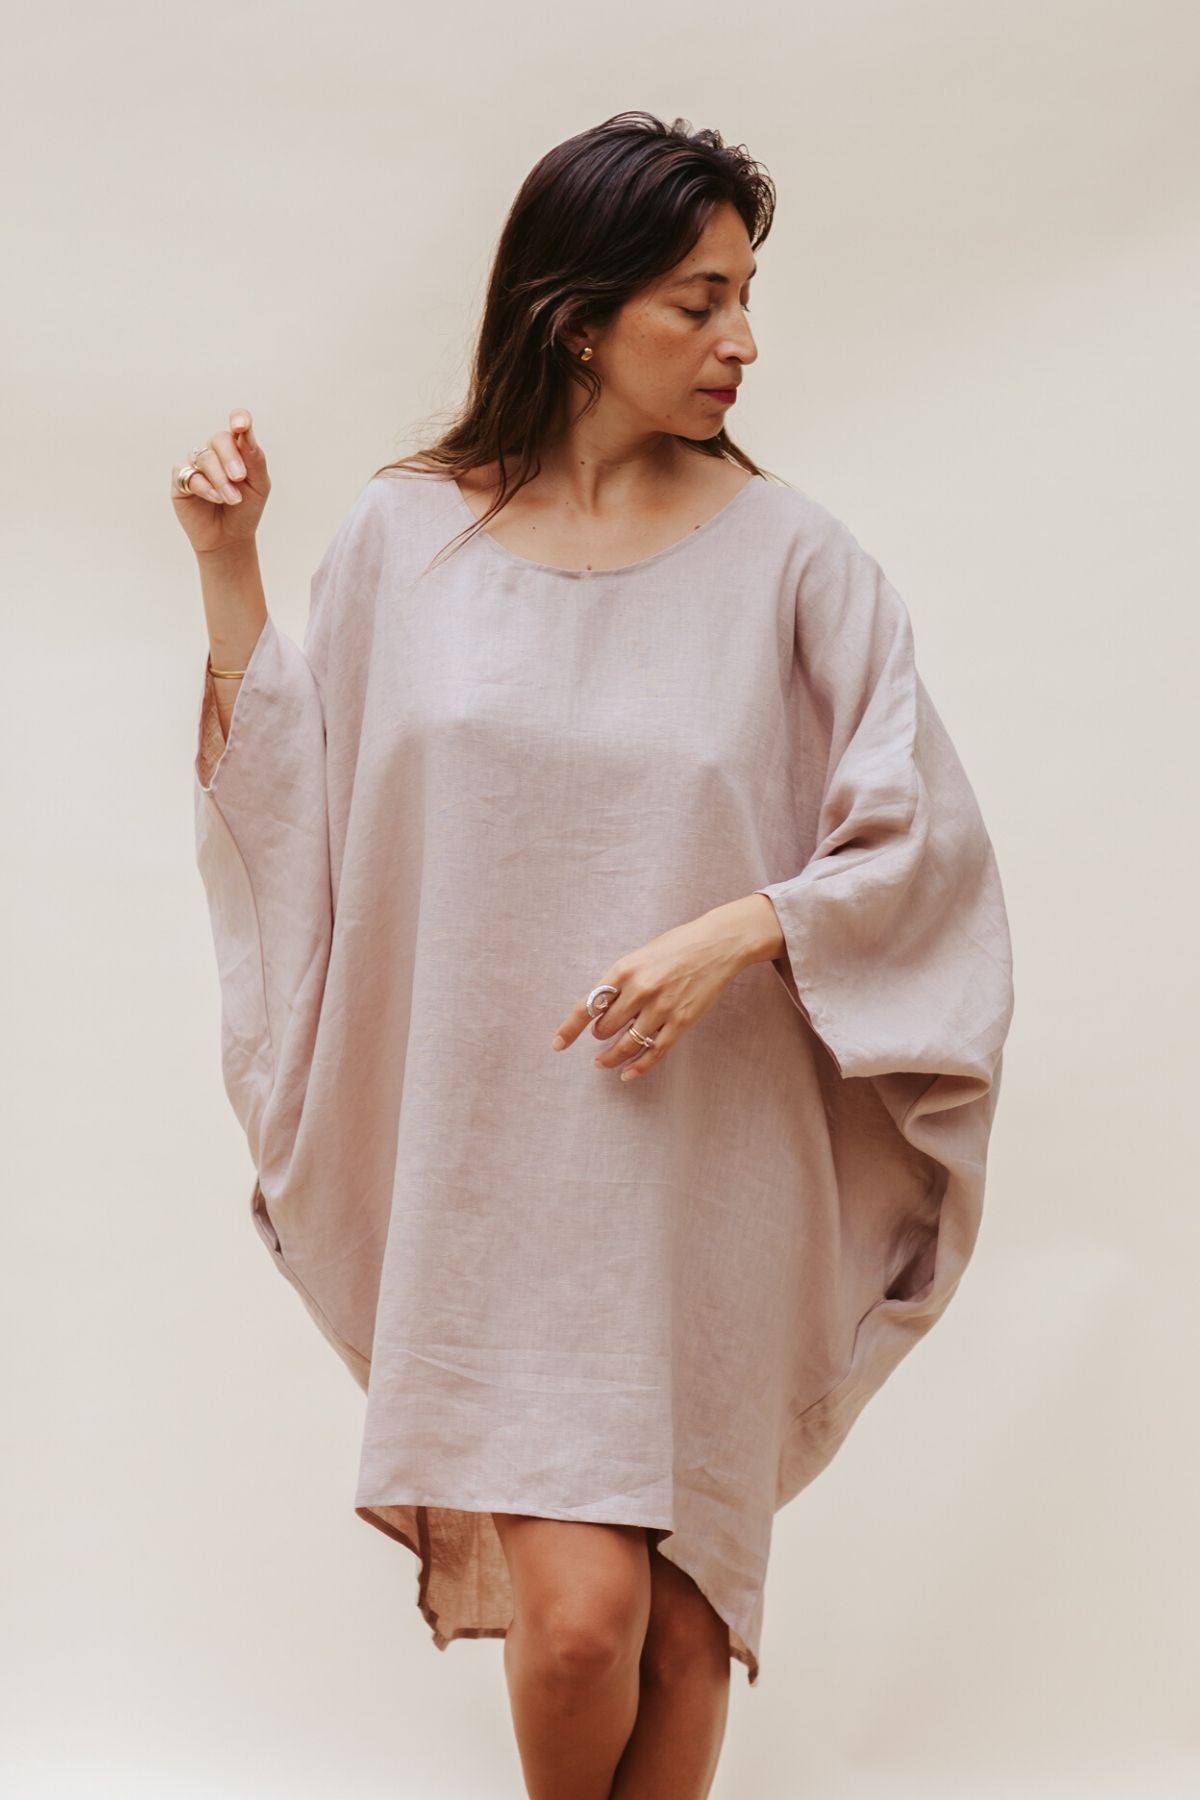 Royal Lavender Butterfly Tunic (100% Linen, Limited Spring Edition) (BI)